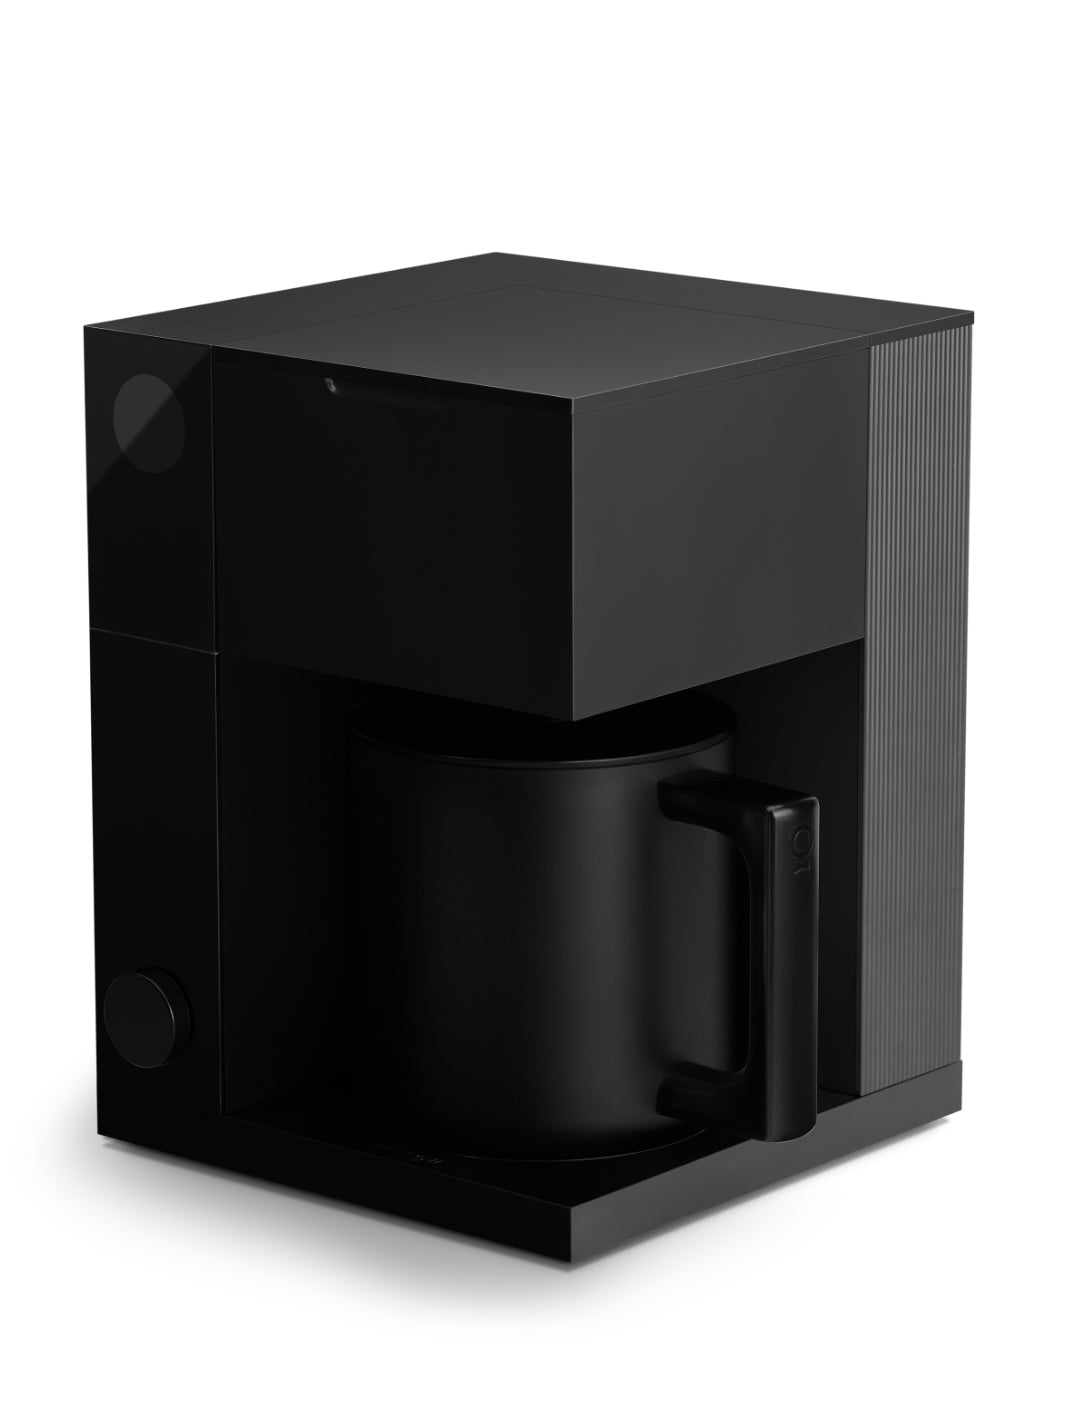 [PRE-ORDER] FELLOW Aiden Precision Coffee Maker (120v)  [SHIPPING MID TO LATE SEPTEMBER 2024]